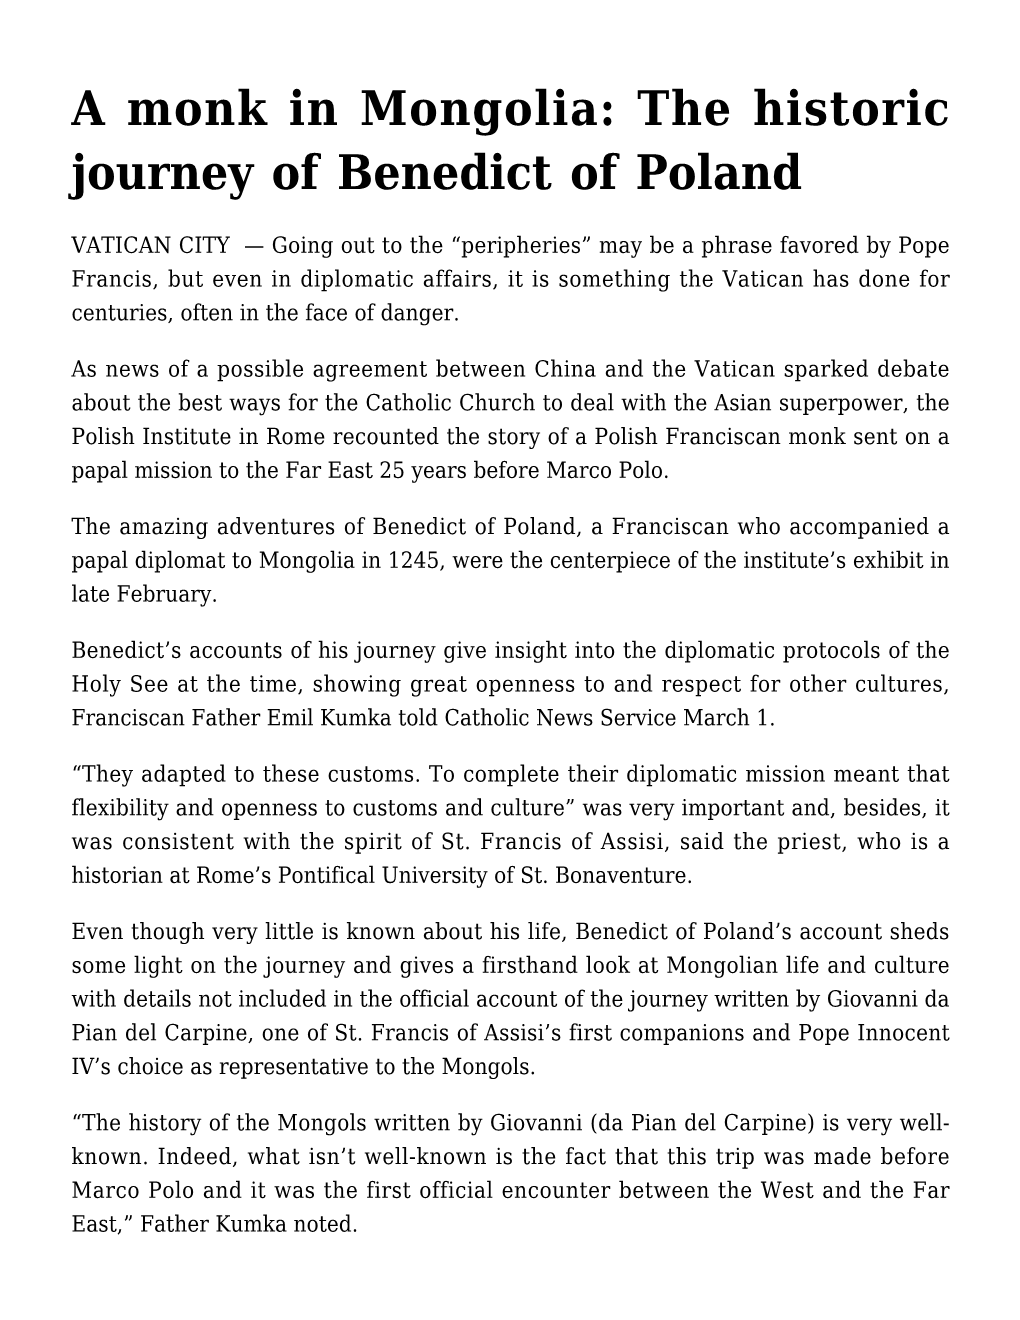 A Monk in Mongolia: the Historic Journey of Benedict of Poland